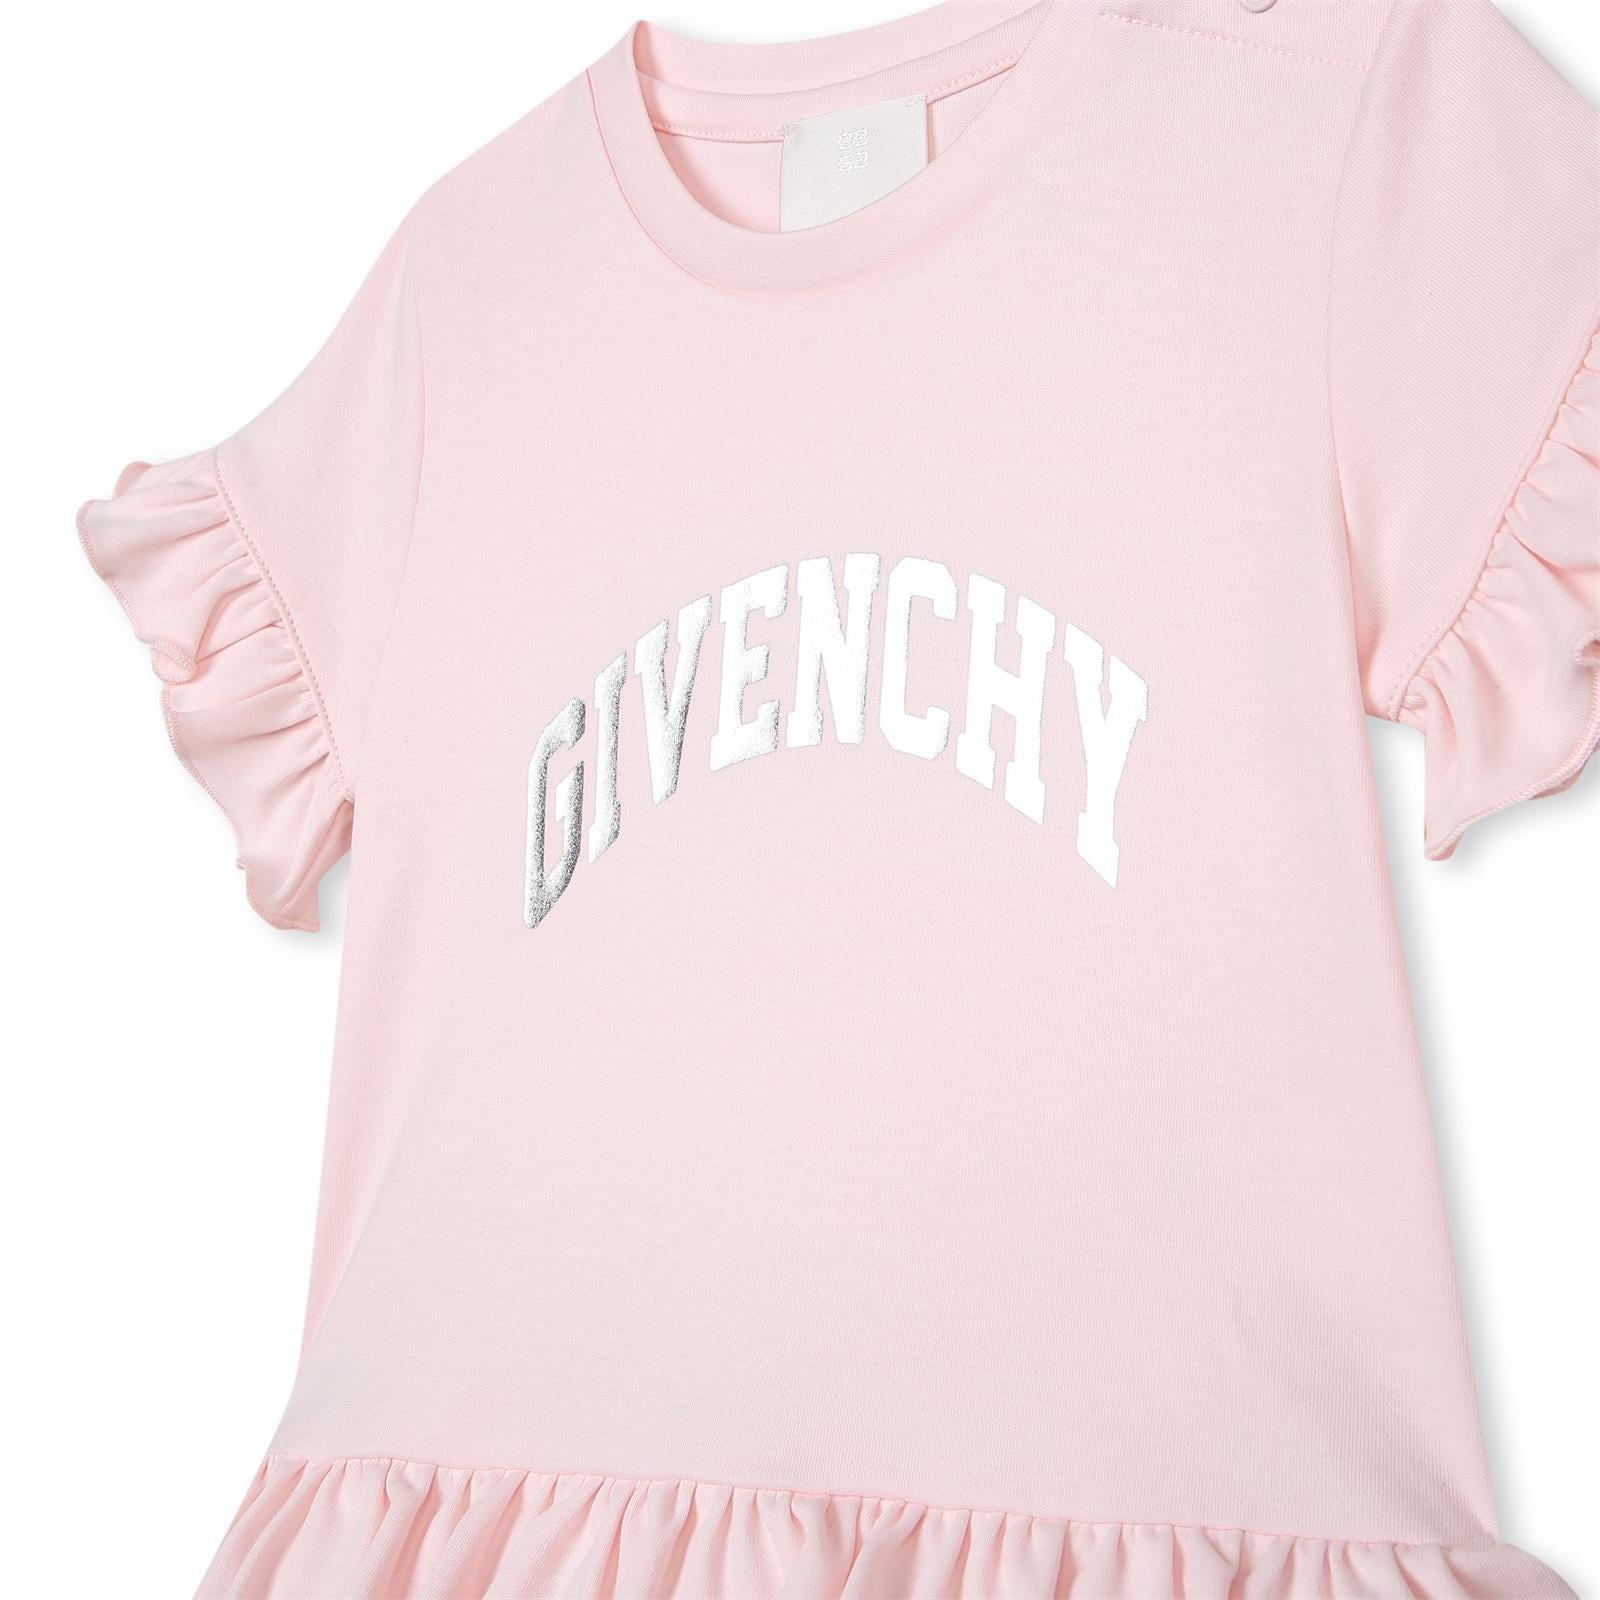 Givenchy Baby Girls Pink Dress